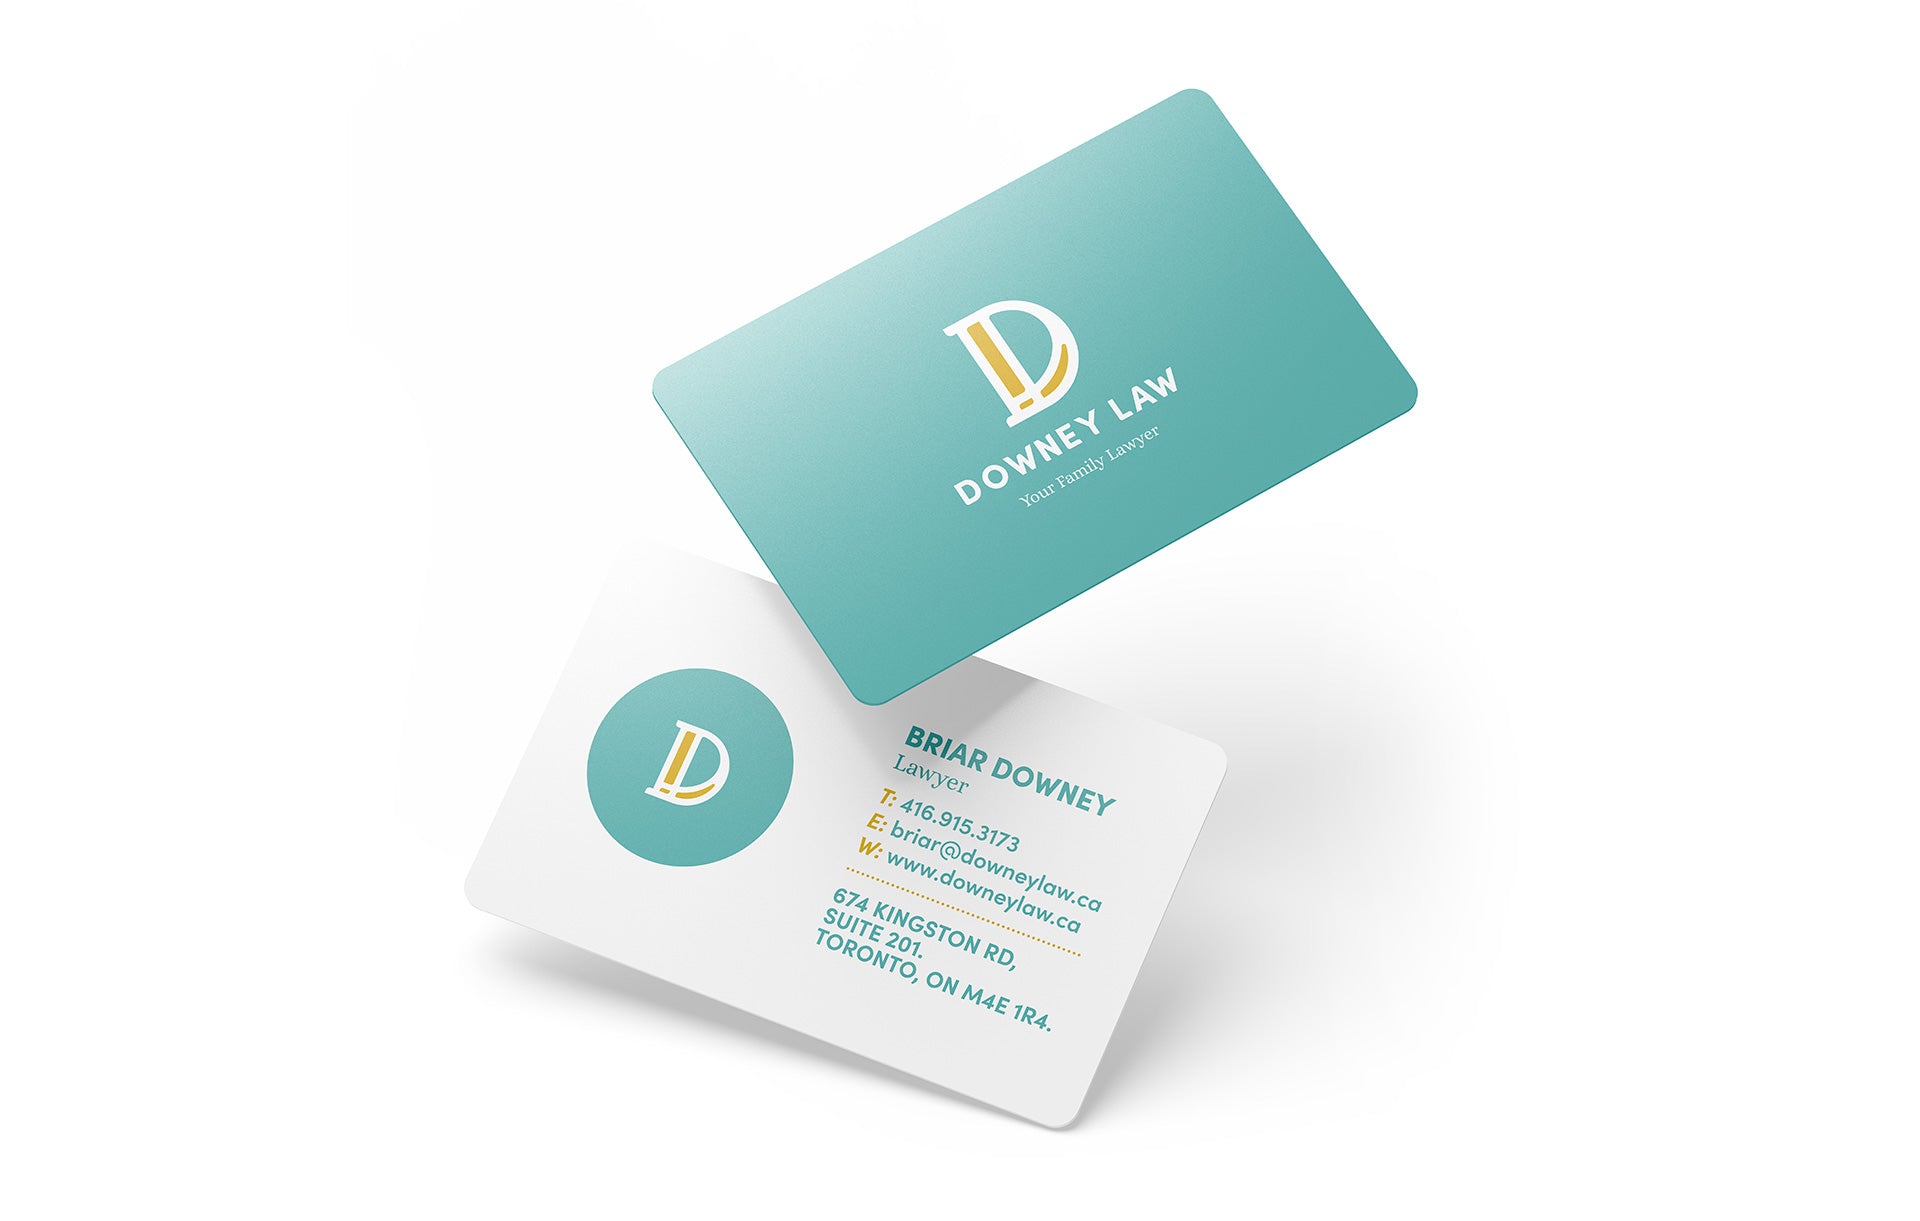 Downey Law - Business Card Design - Scott Luscombe - Creatibly